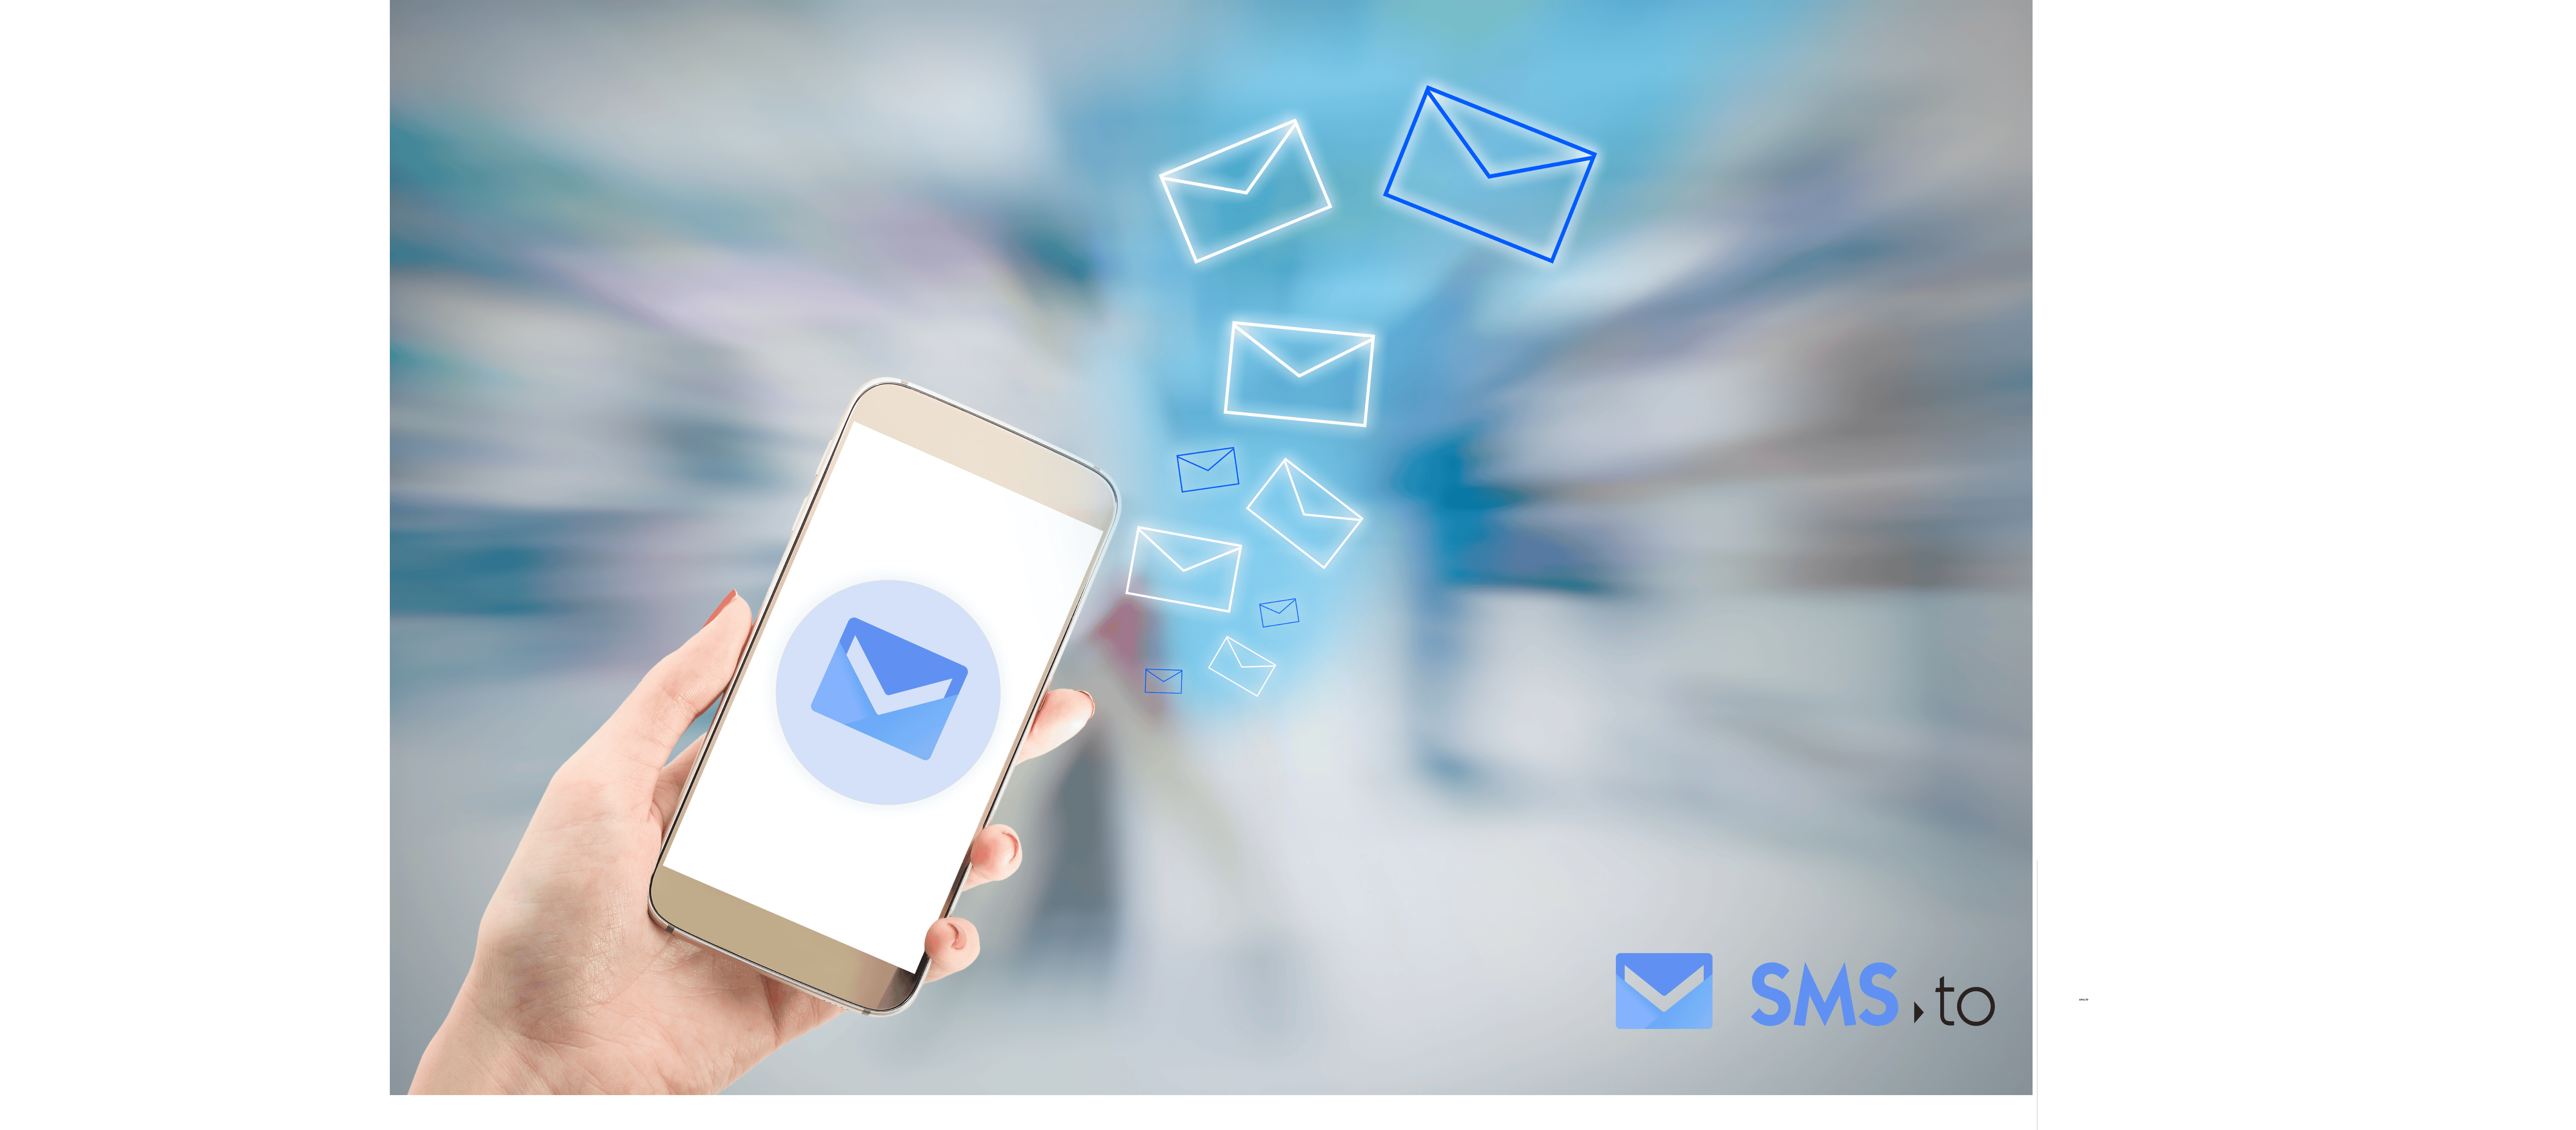 A hand holding a phone with the logo of sms.to and above it a large number of messages flying away.